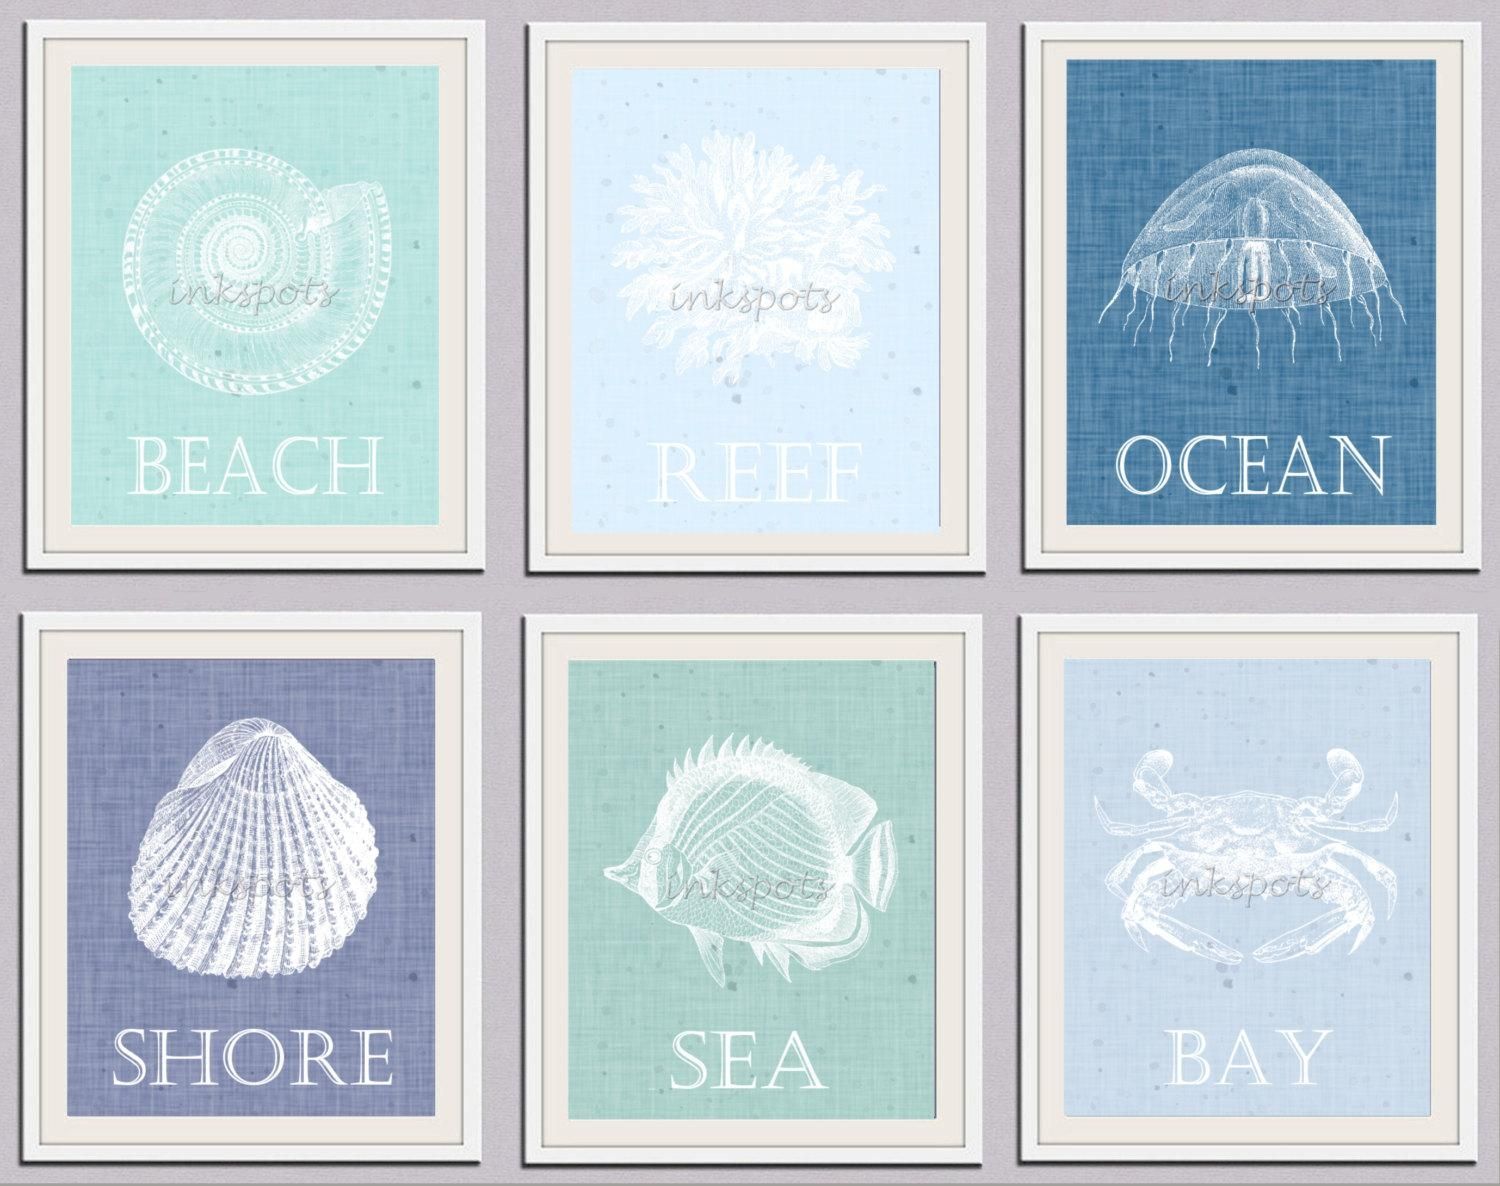 Furniture. Modern Print Art Poster For House Wall Decorations Throughout Seashell Prints Wall Art (Photo 4 of 20)